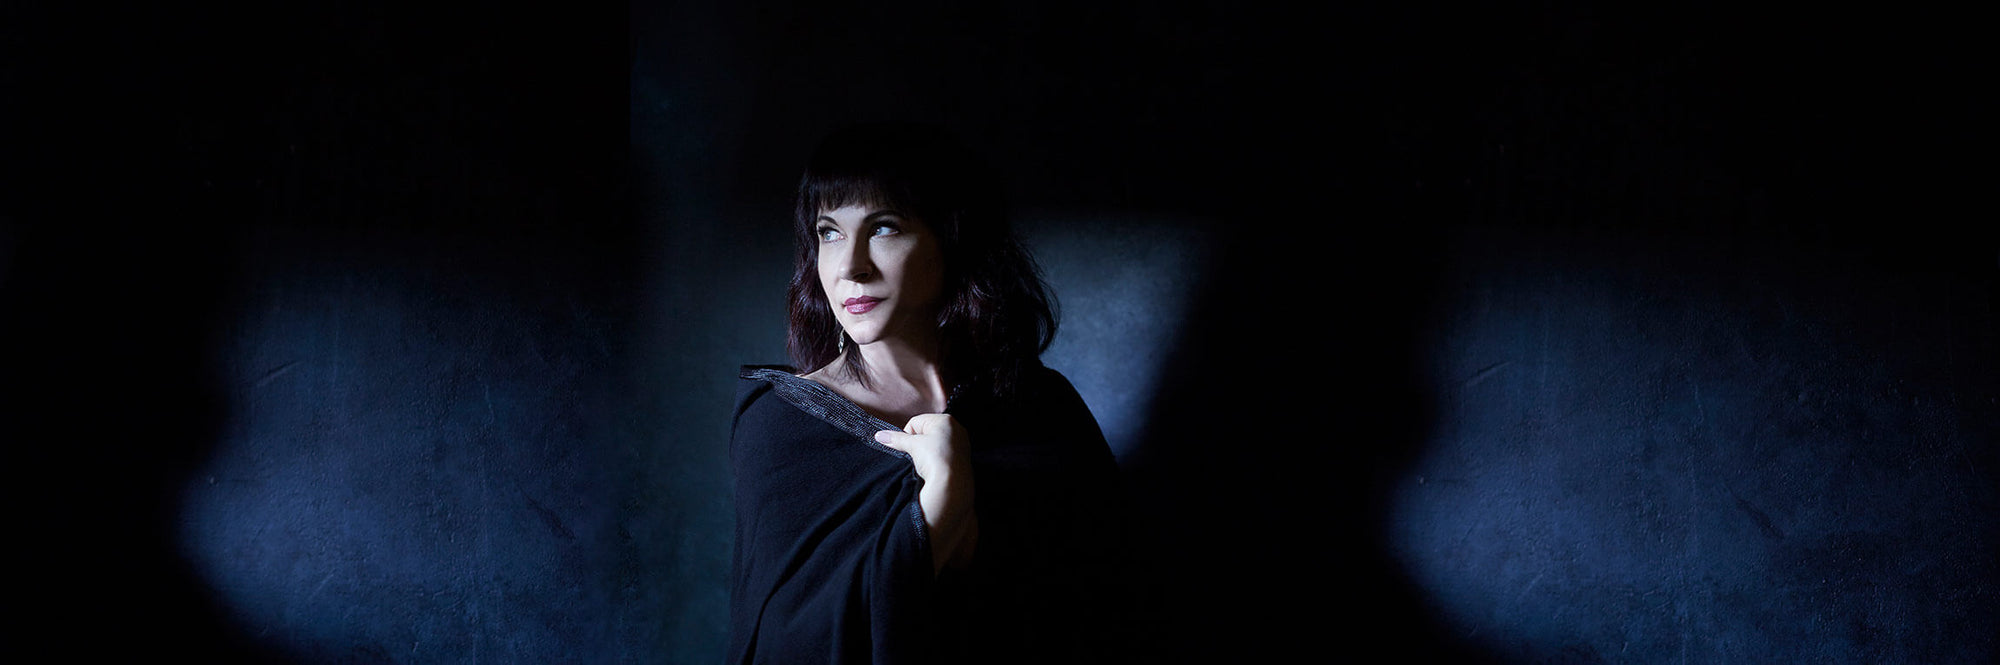 Janiva Magness Releases New Single “Change In The Weather”